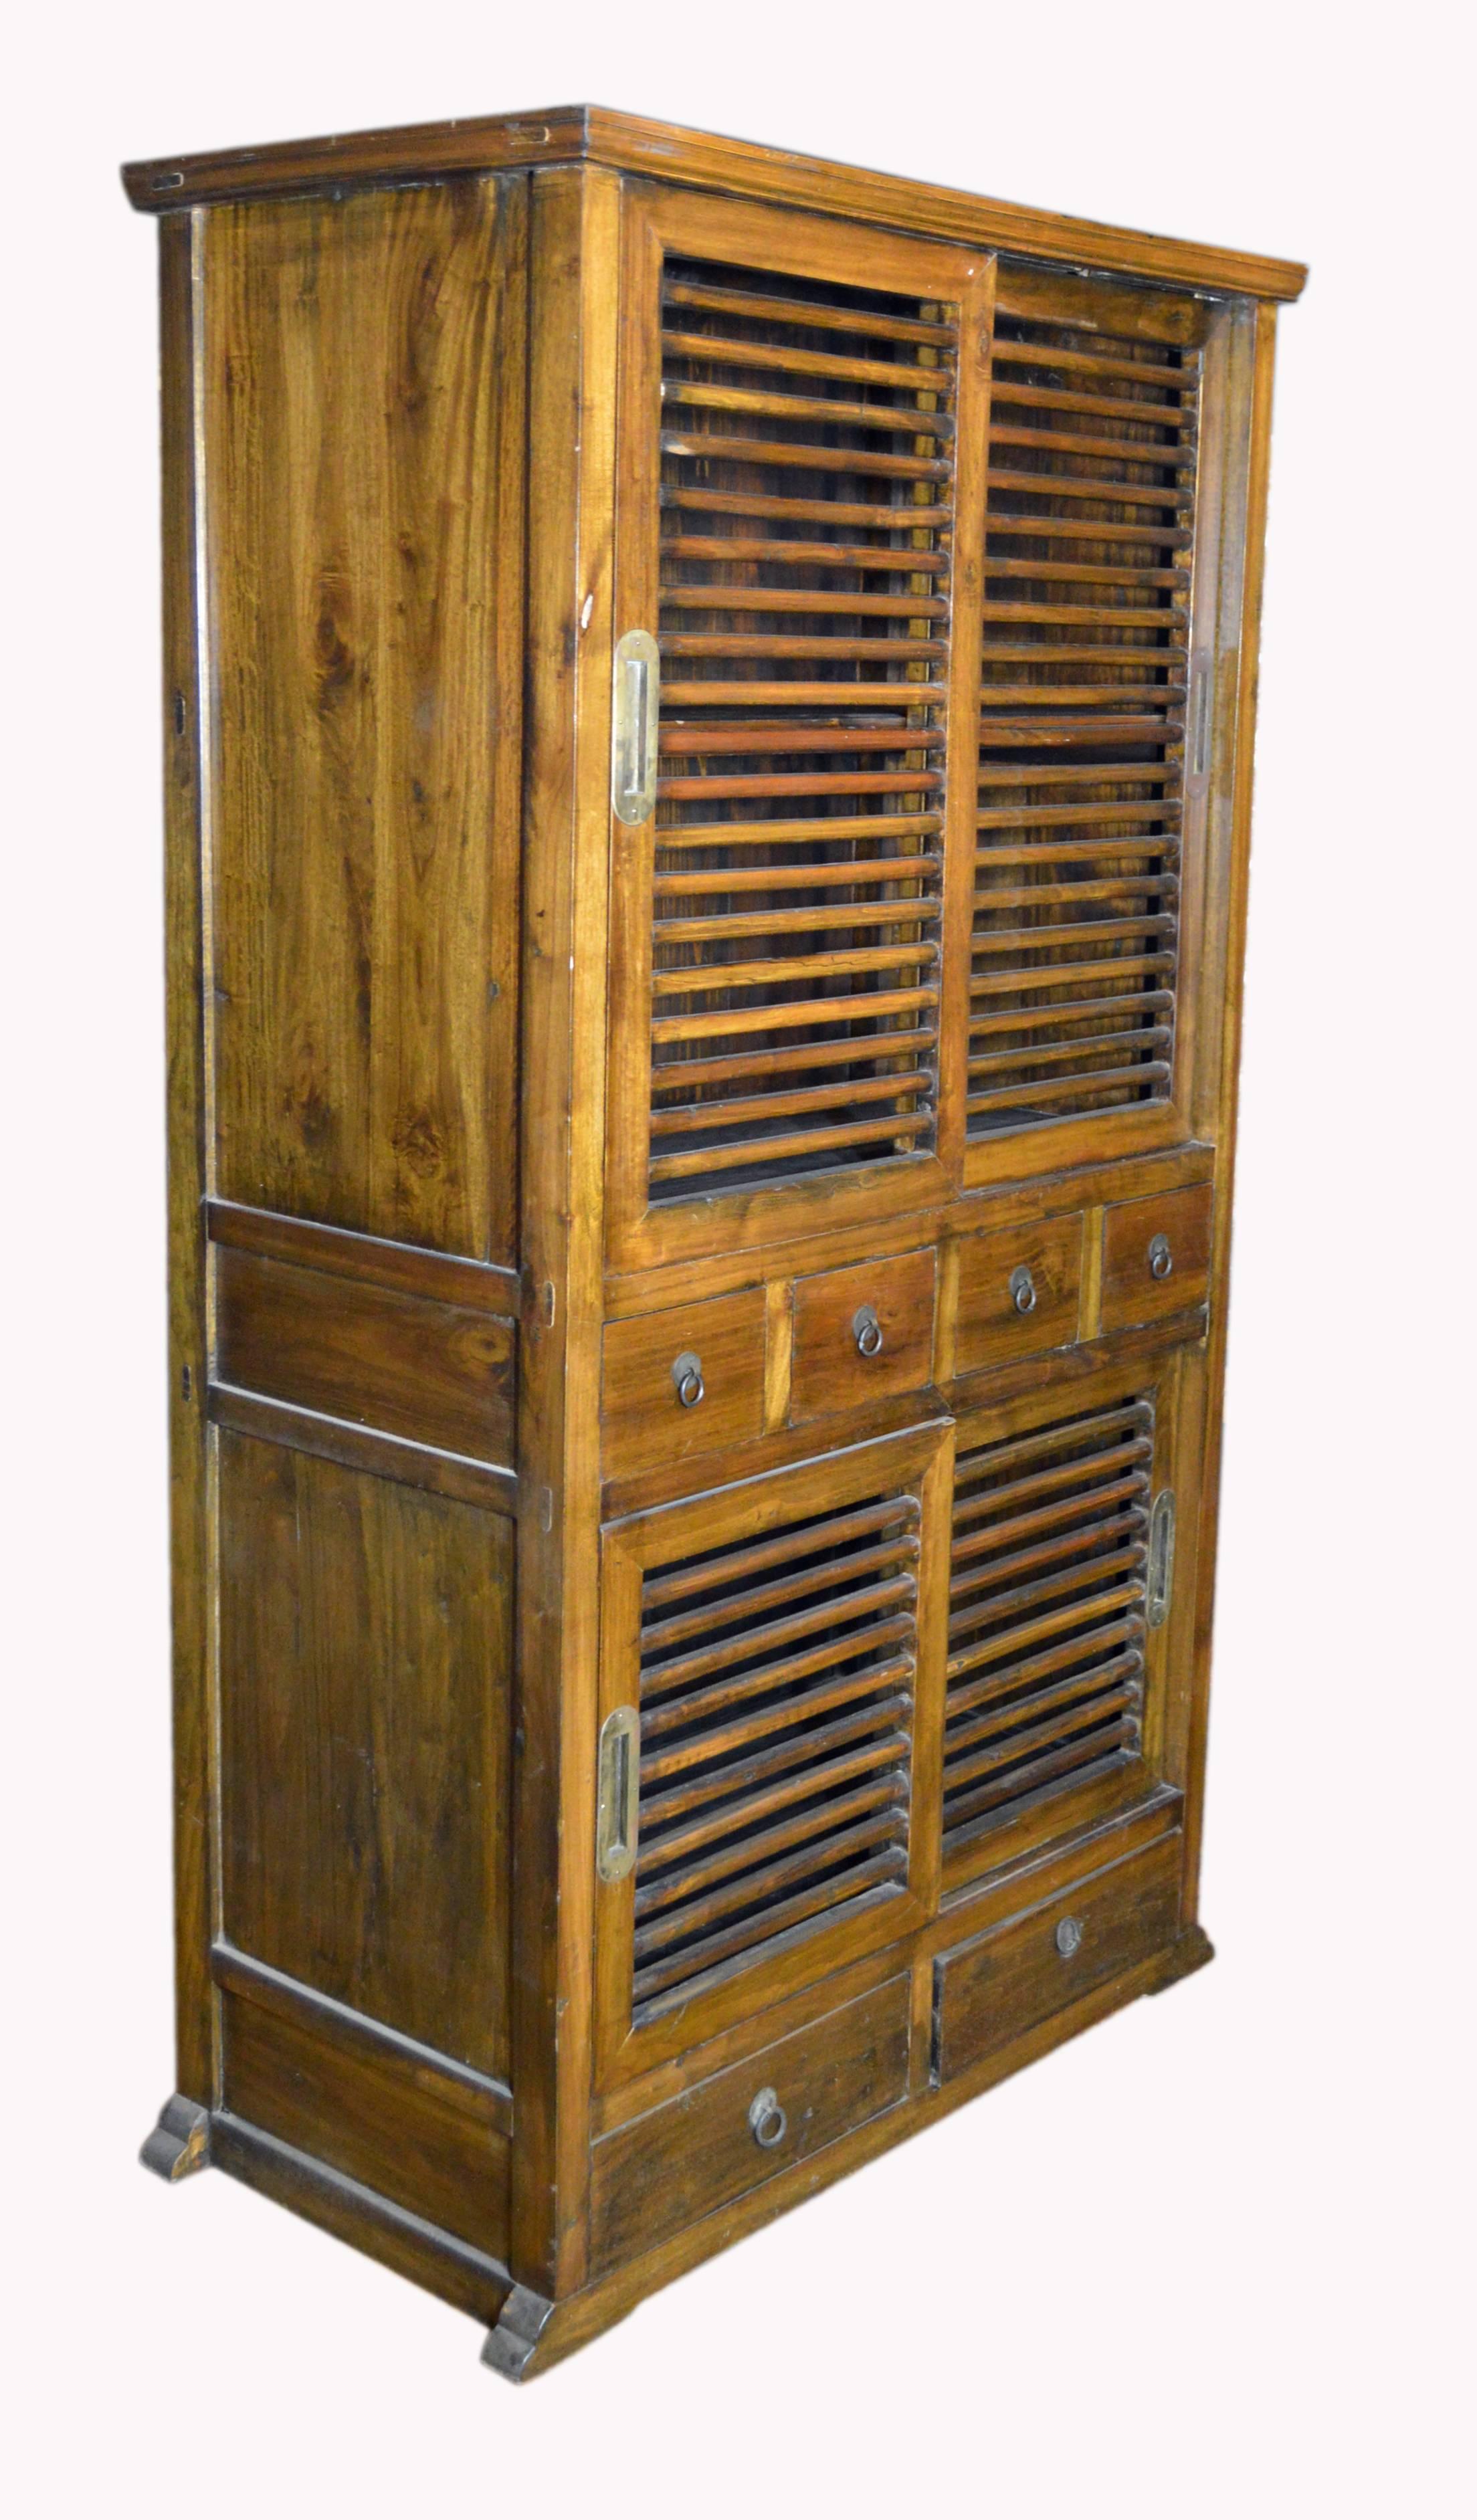 Indonesian 19th Century Dutch Colonial Armoire with Fretwork Sliding Doors and Drawers